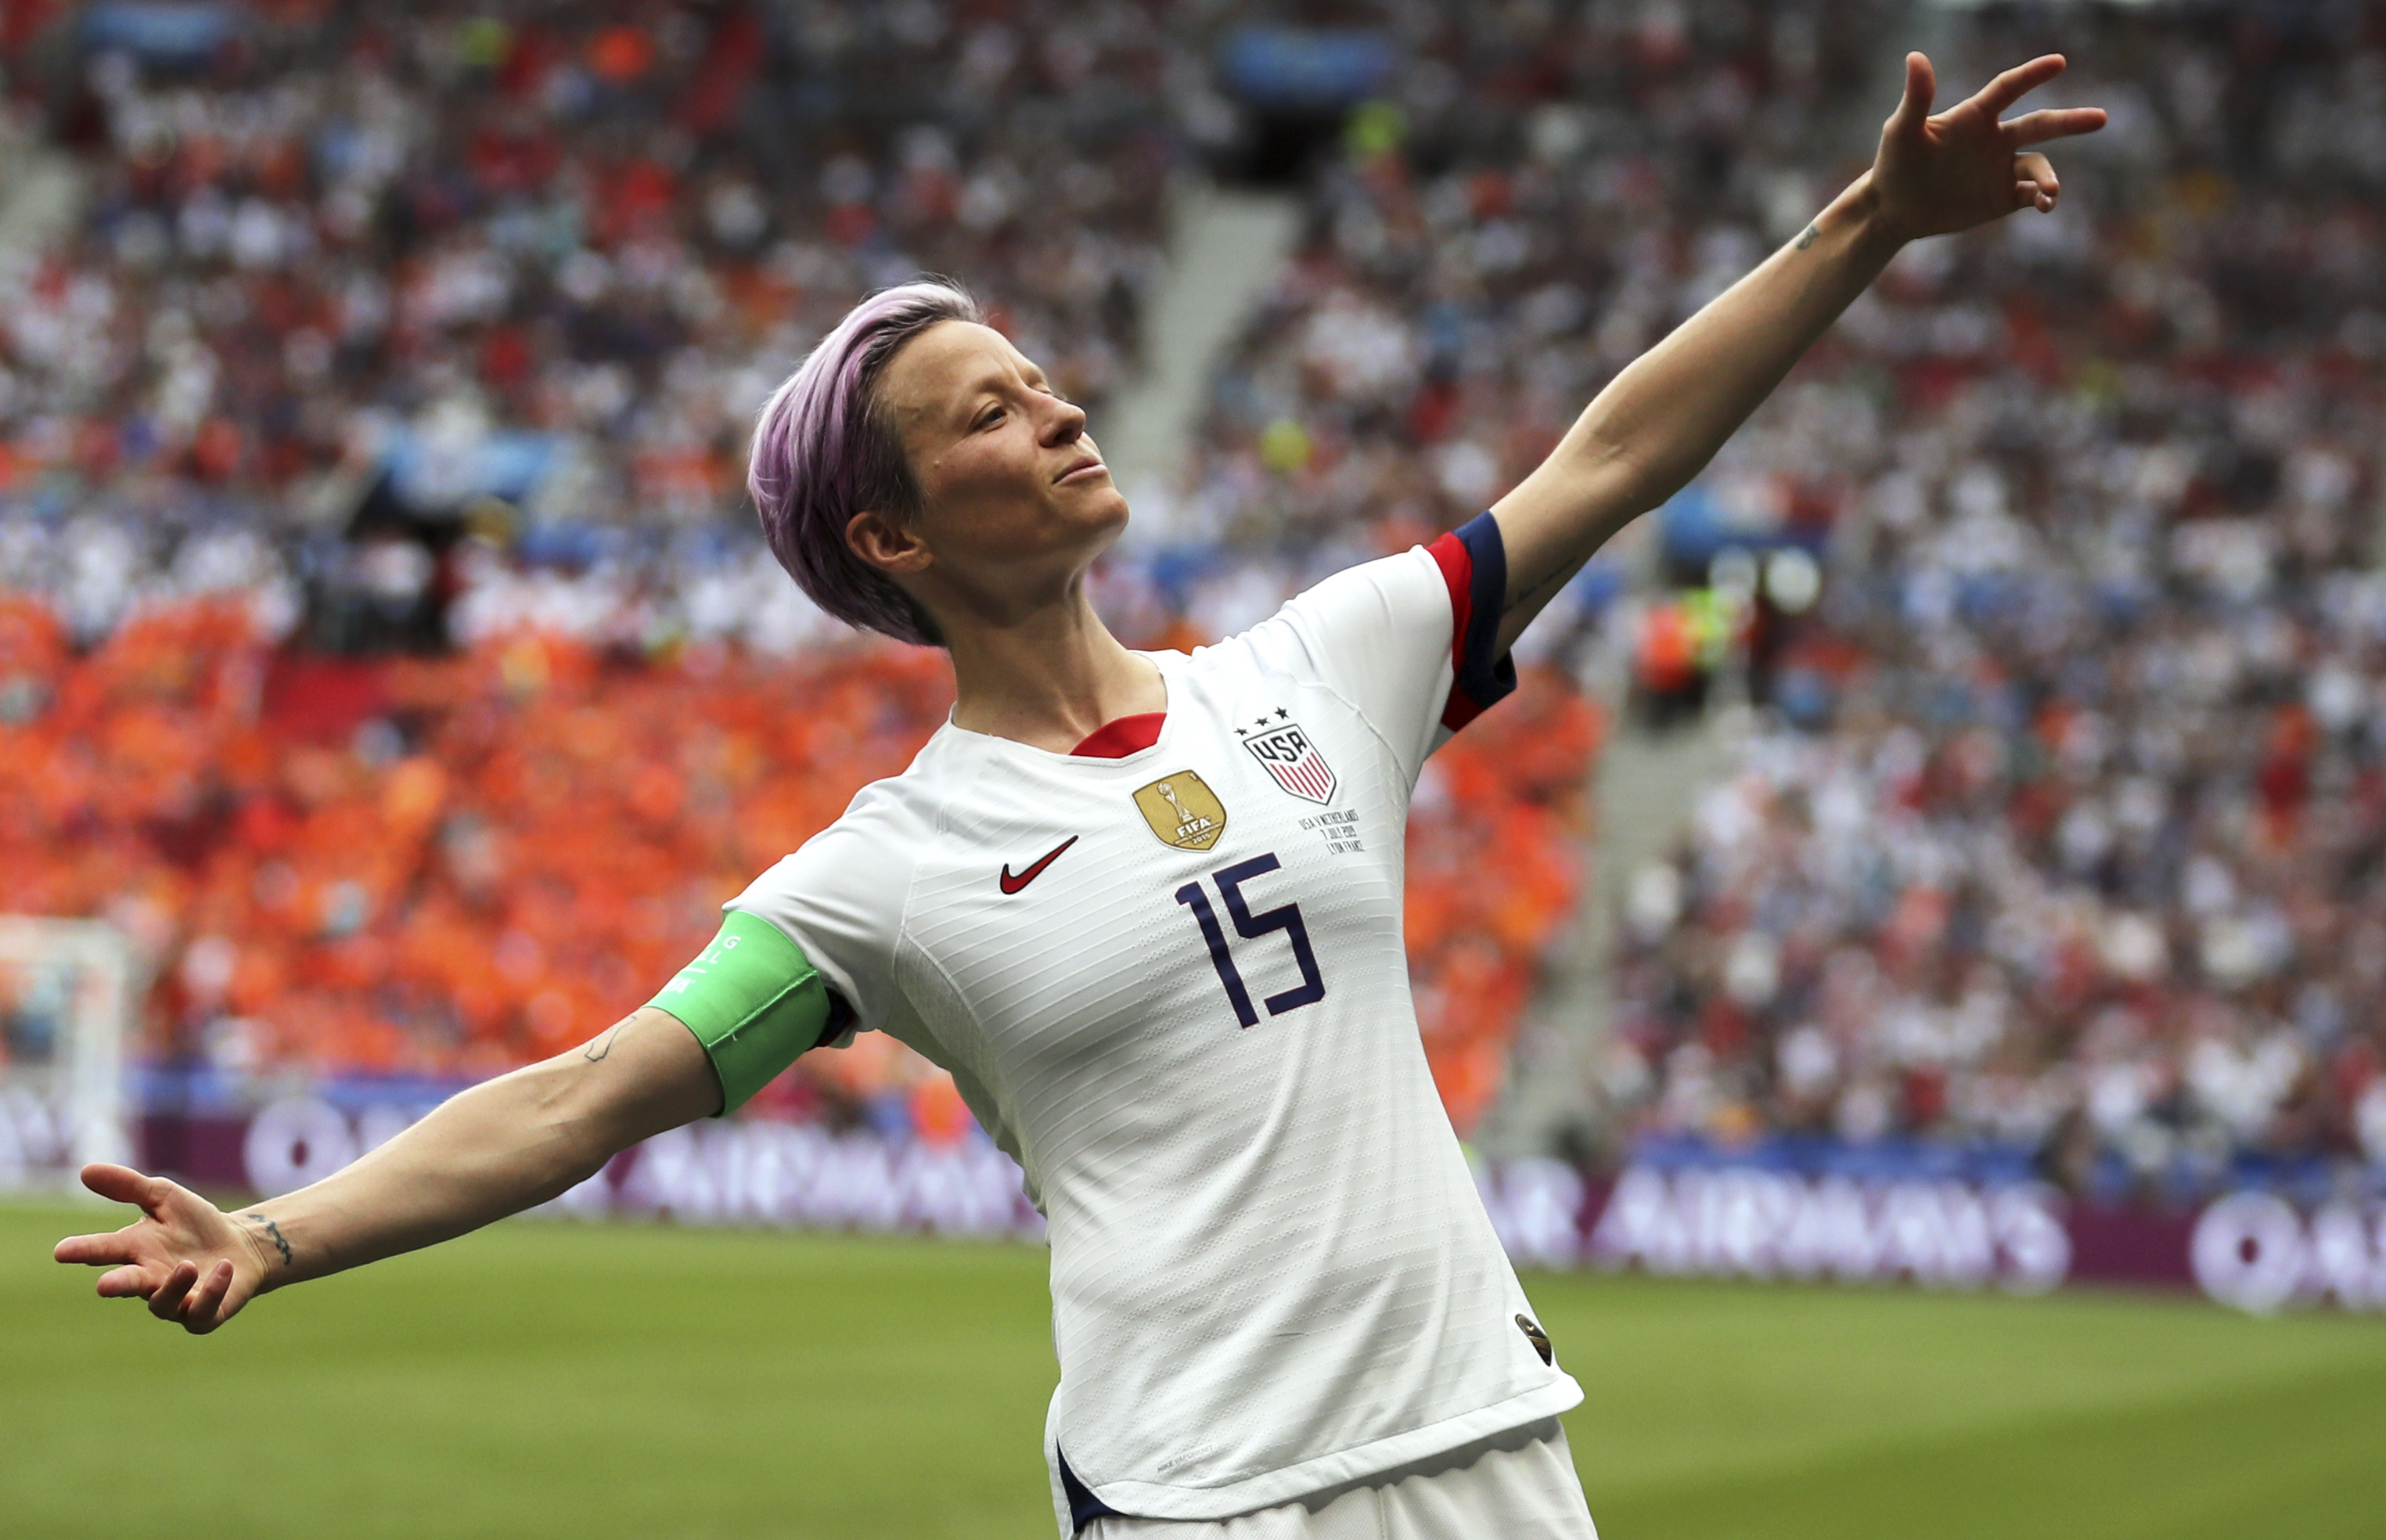 Megan Rapinoe celebrates after scoring the opening goal from the penalty spot during the Women’s World Cup final soccer match between US and The Netherlands at the Stade de Lyon in Decines, outside Lyon, France, Sunday, July 7, 2019.